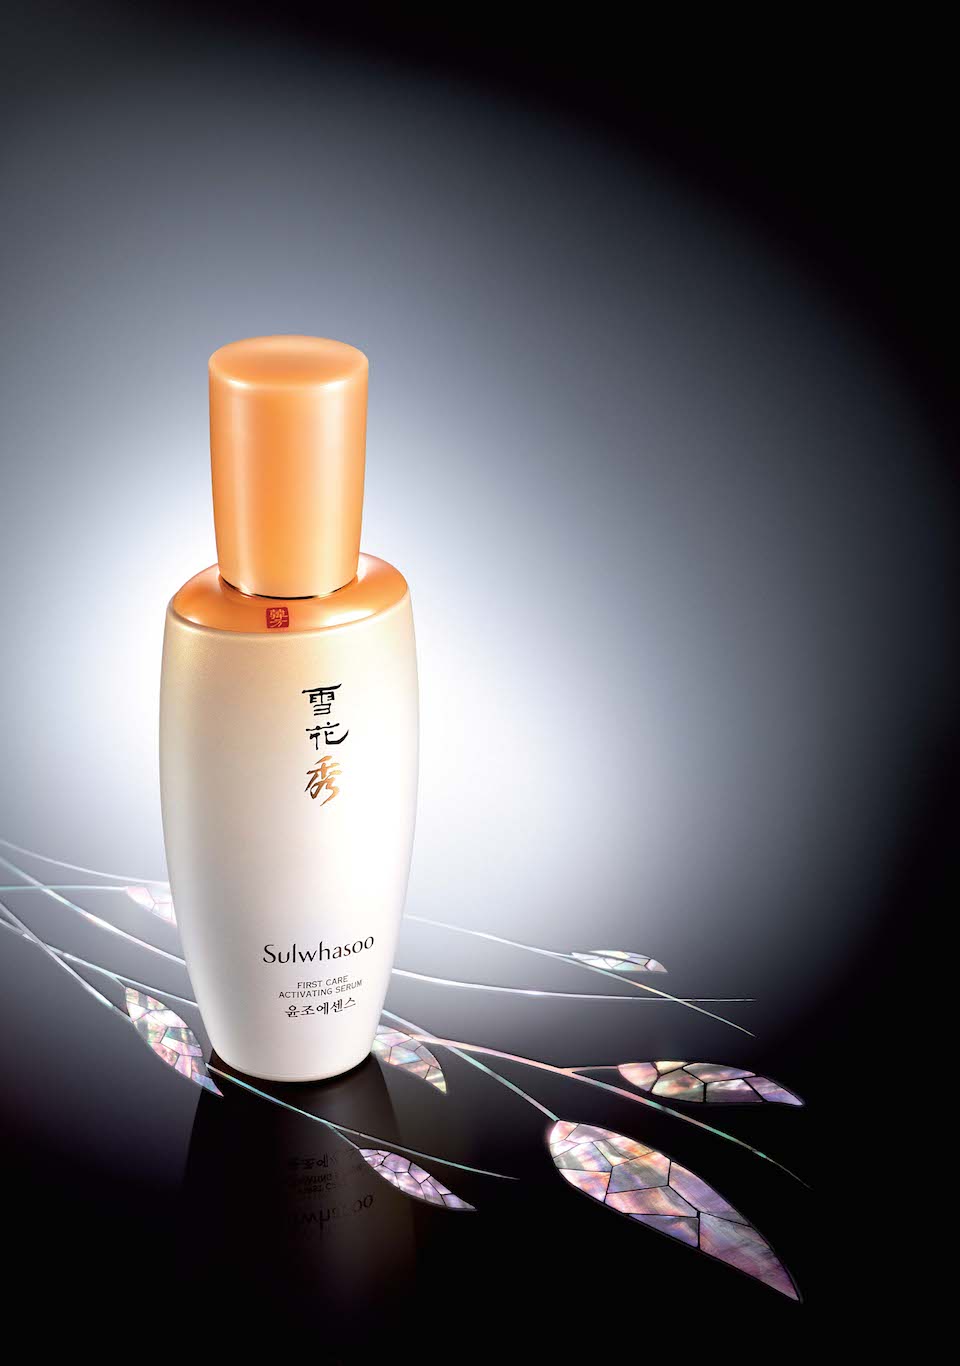 Sulwhasoo’s First Care Activating Serum